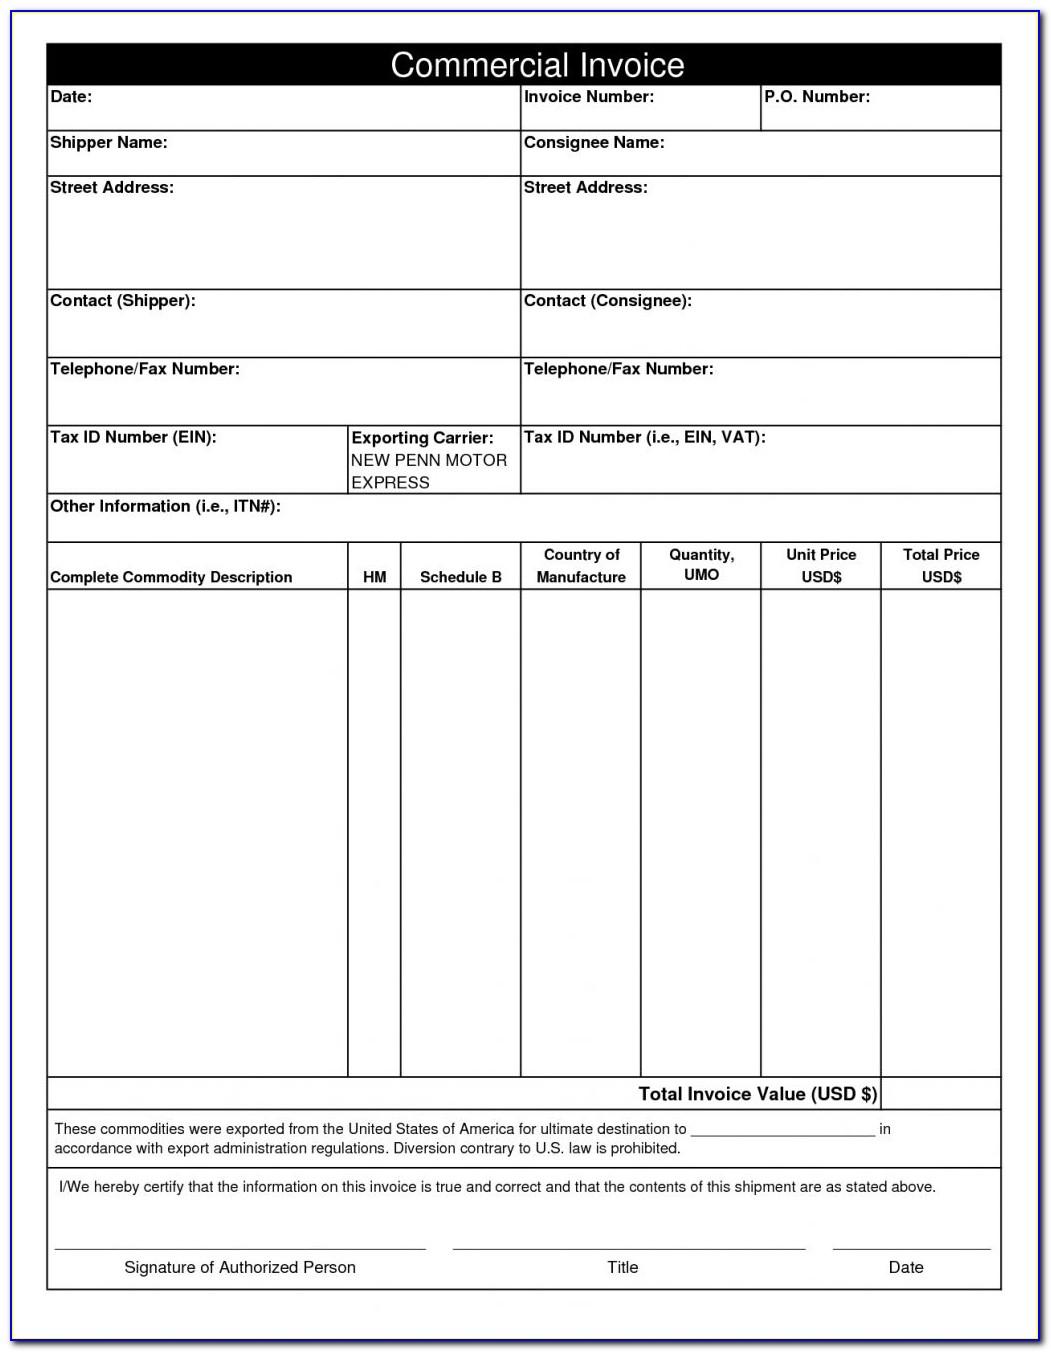 Ups Commercial Invoice Fillable Form